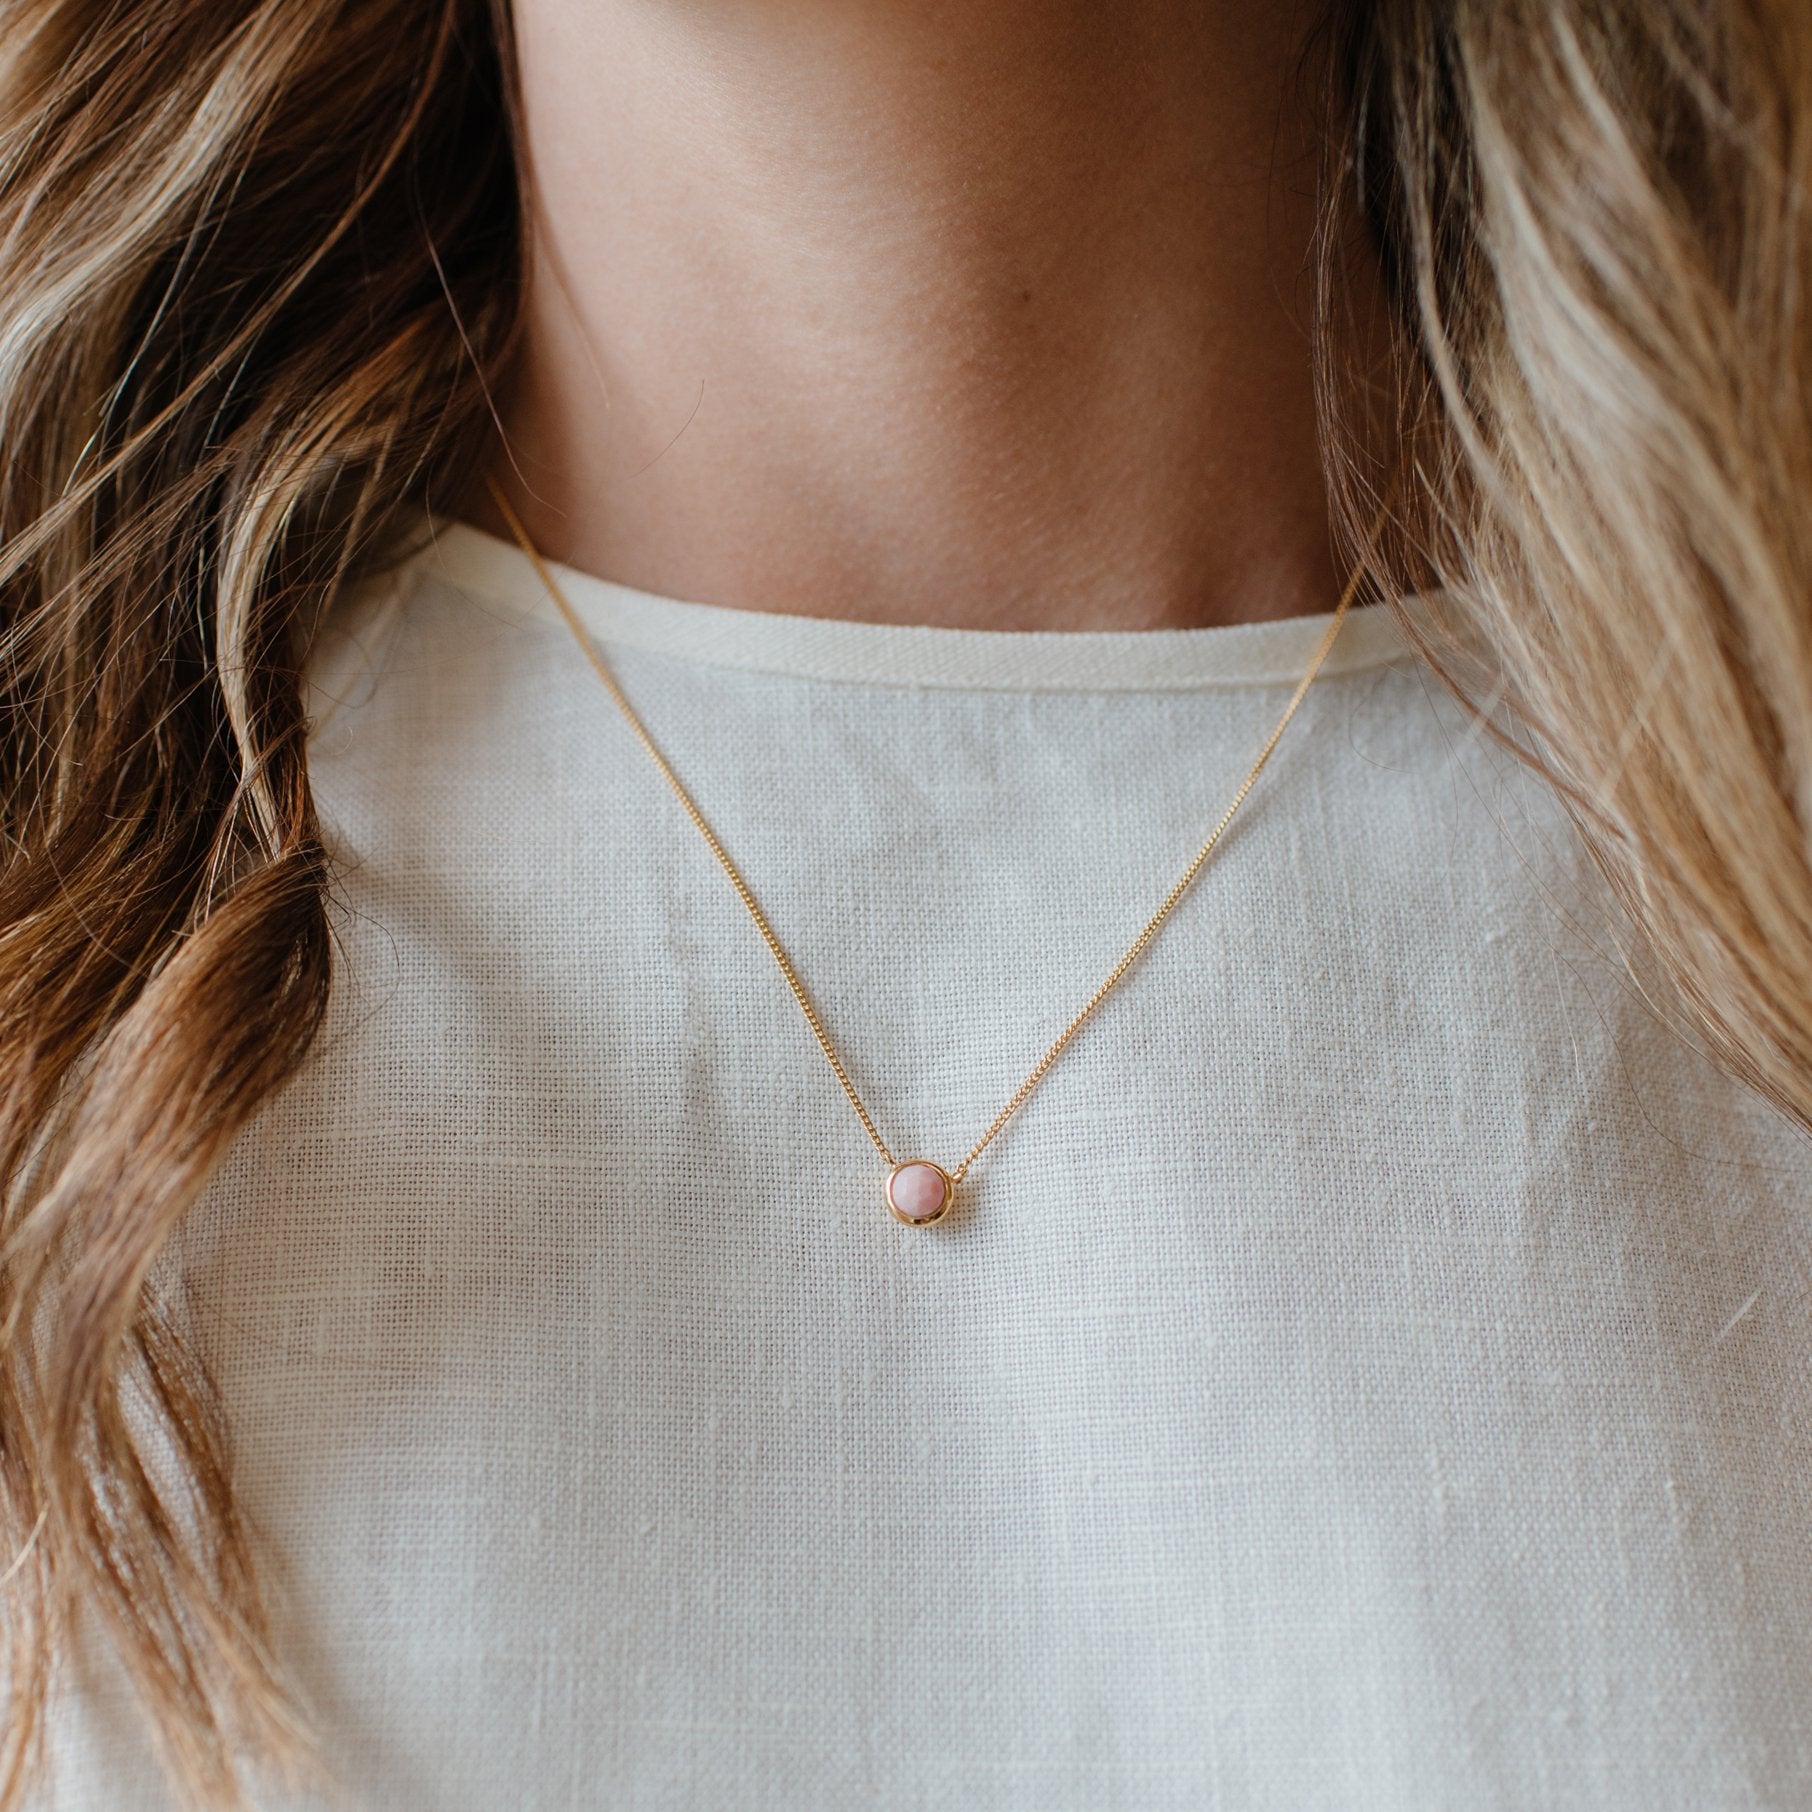 DAINTY LEGACY NECKLACE - PINK OPAL & GOLD - SO PRETTY CARA COTTER